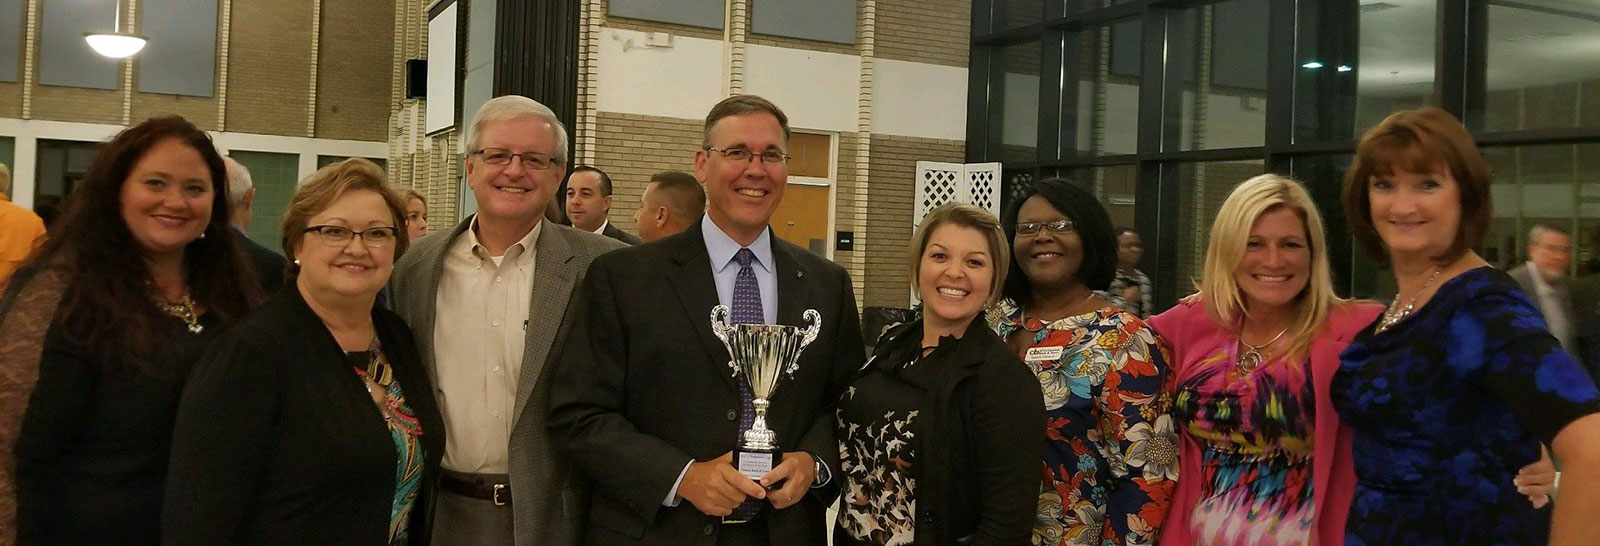 Citizens Bank & Trust wins the 2017 Champions Cup as Community Service Business of the Year